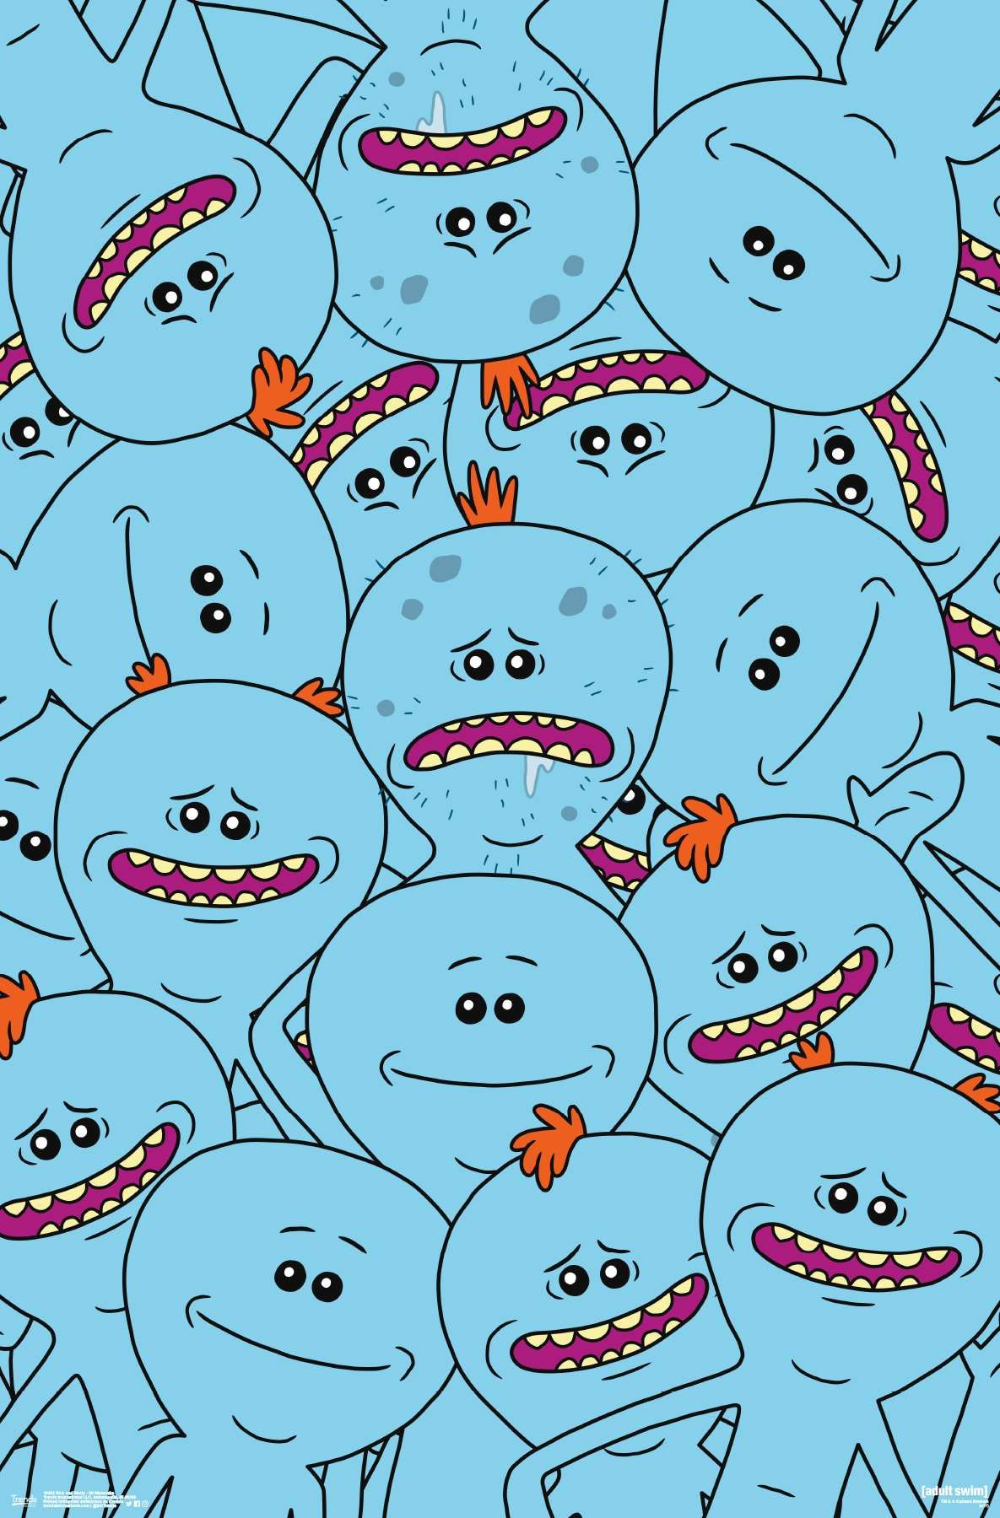 Rick And Morty. Meeseeks Poster. Rick and morty stickers, Rick and morty drawing, Rick and morty image